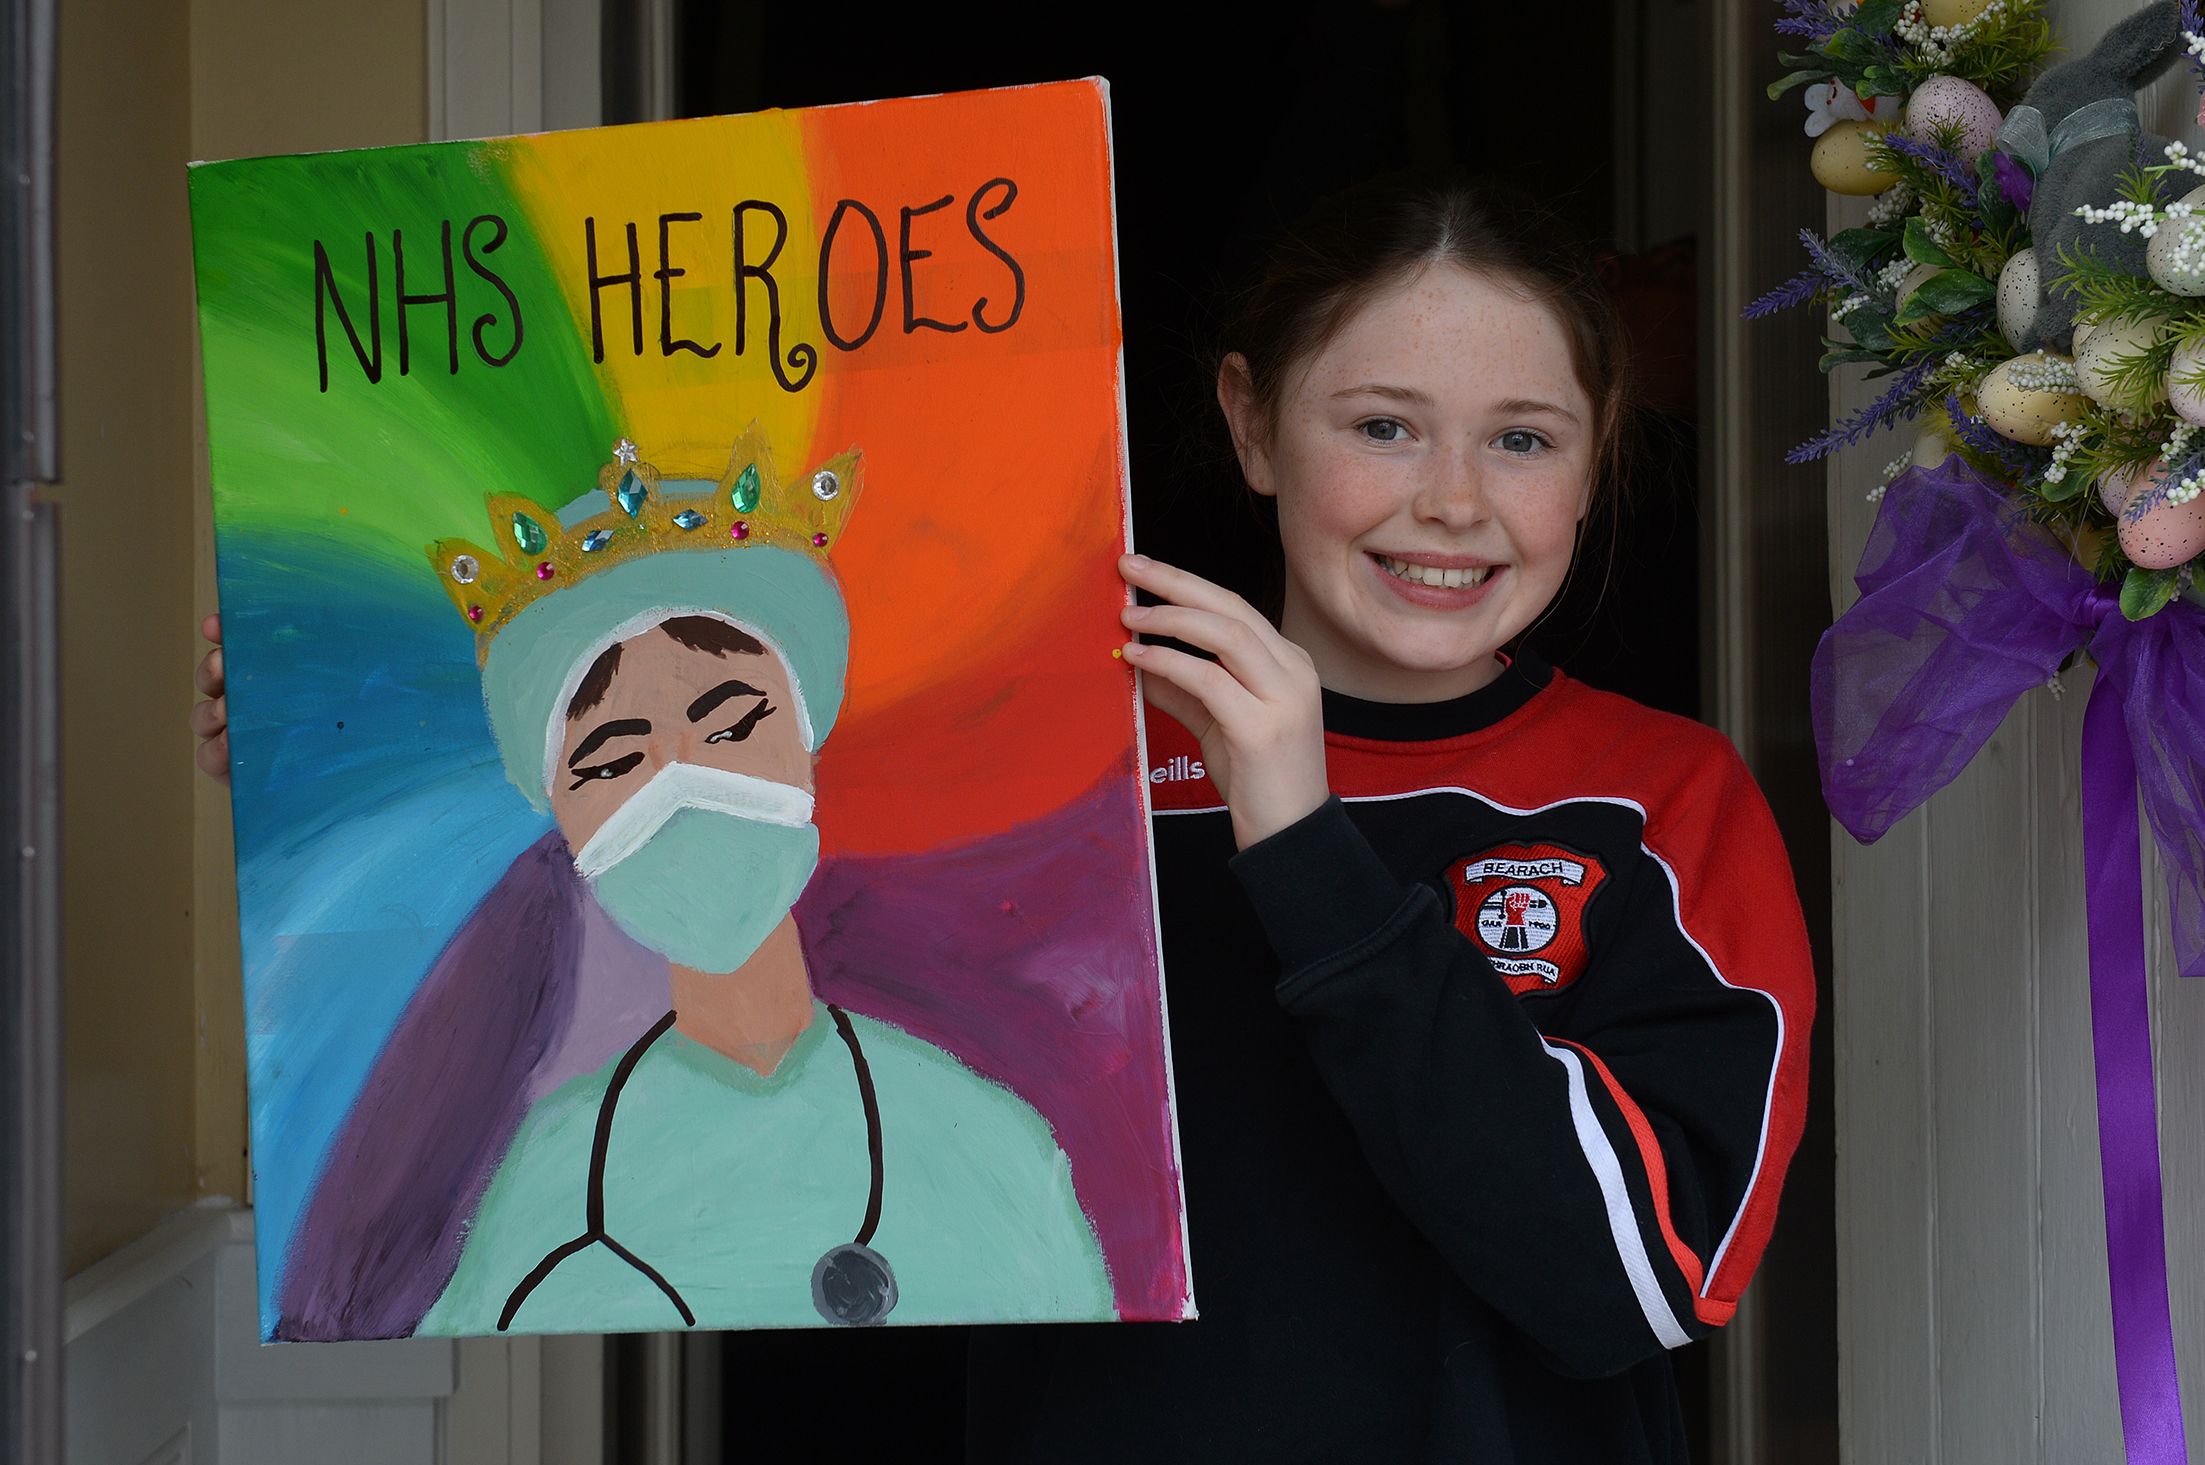 Talented Beragh artists show support for NHS Heroes